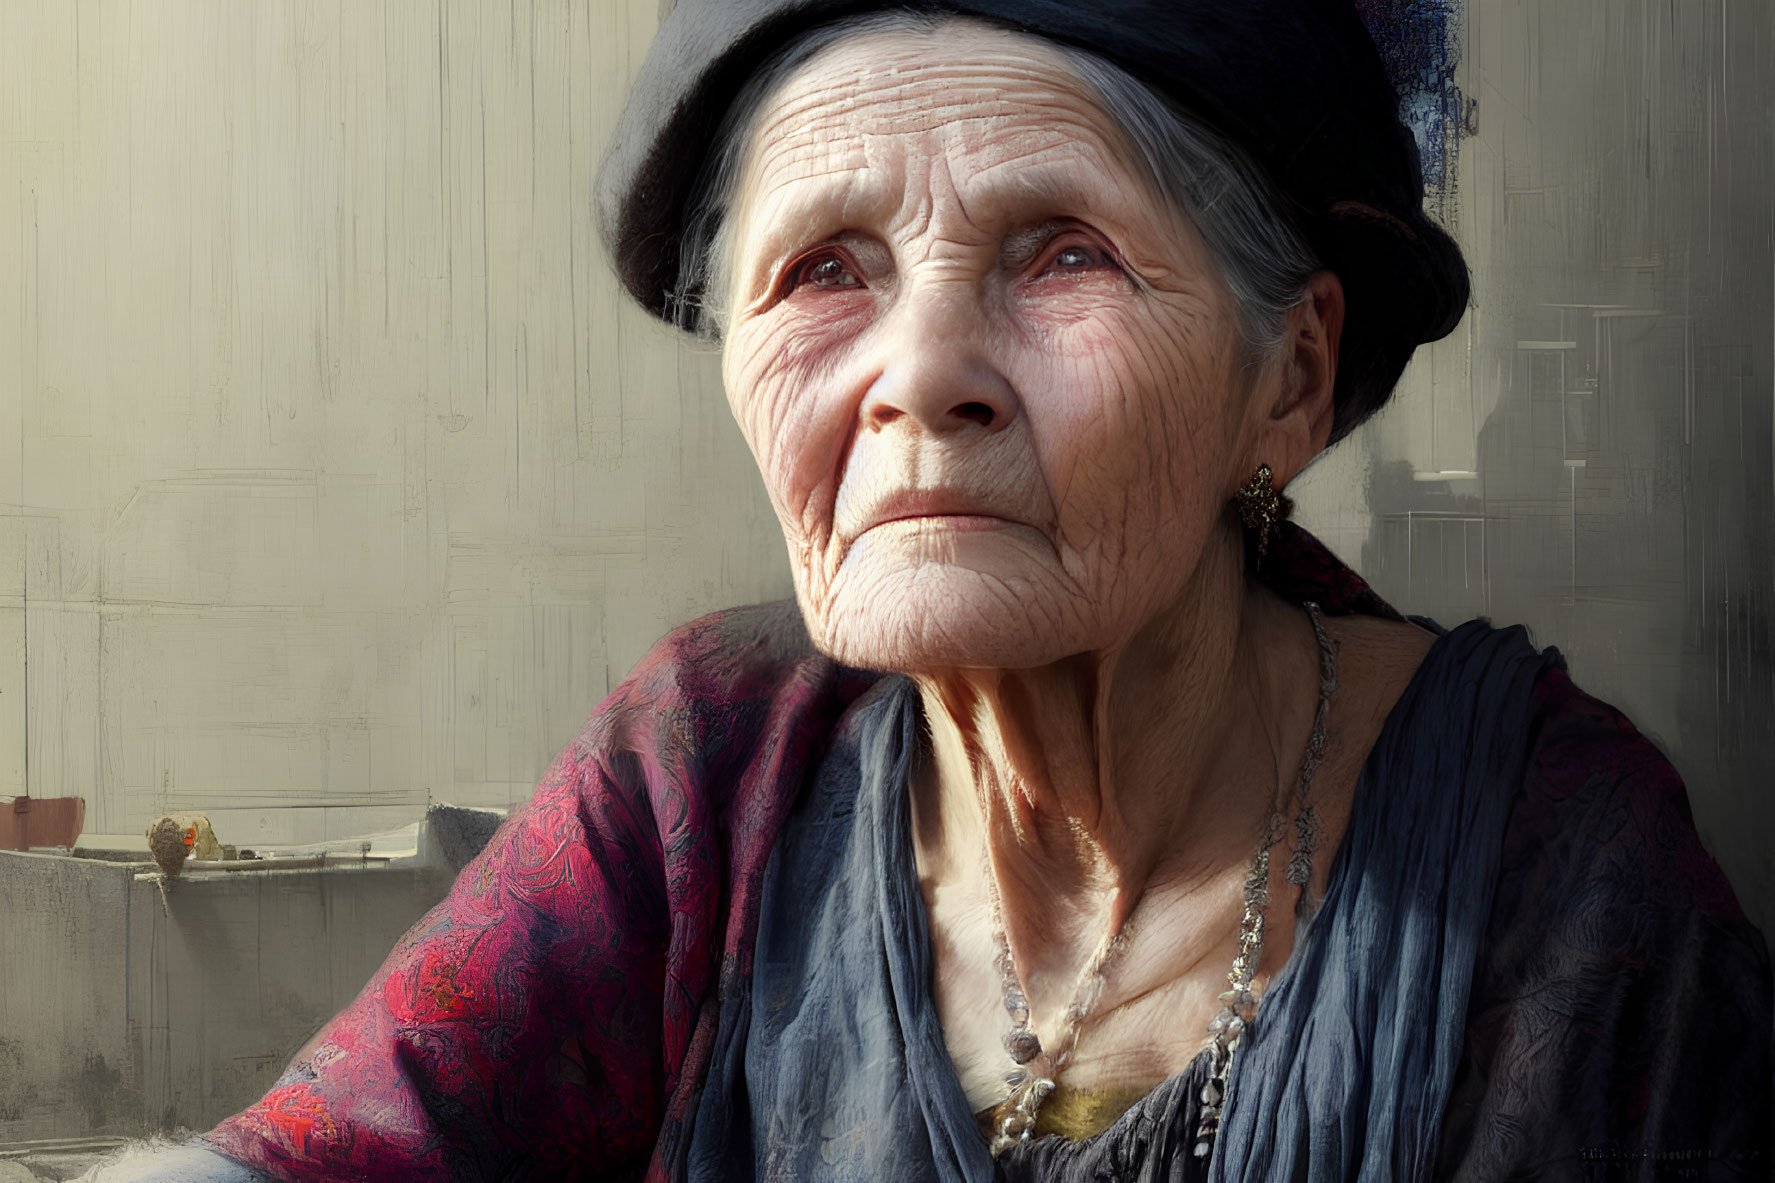 Elderly woman in black hat and colorful blouse gazing upwards.